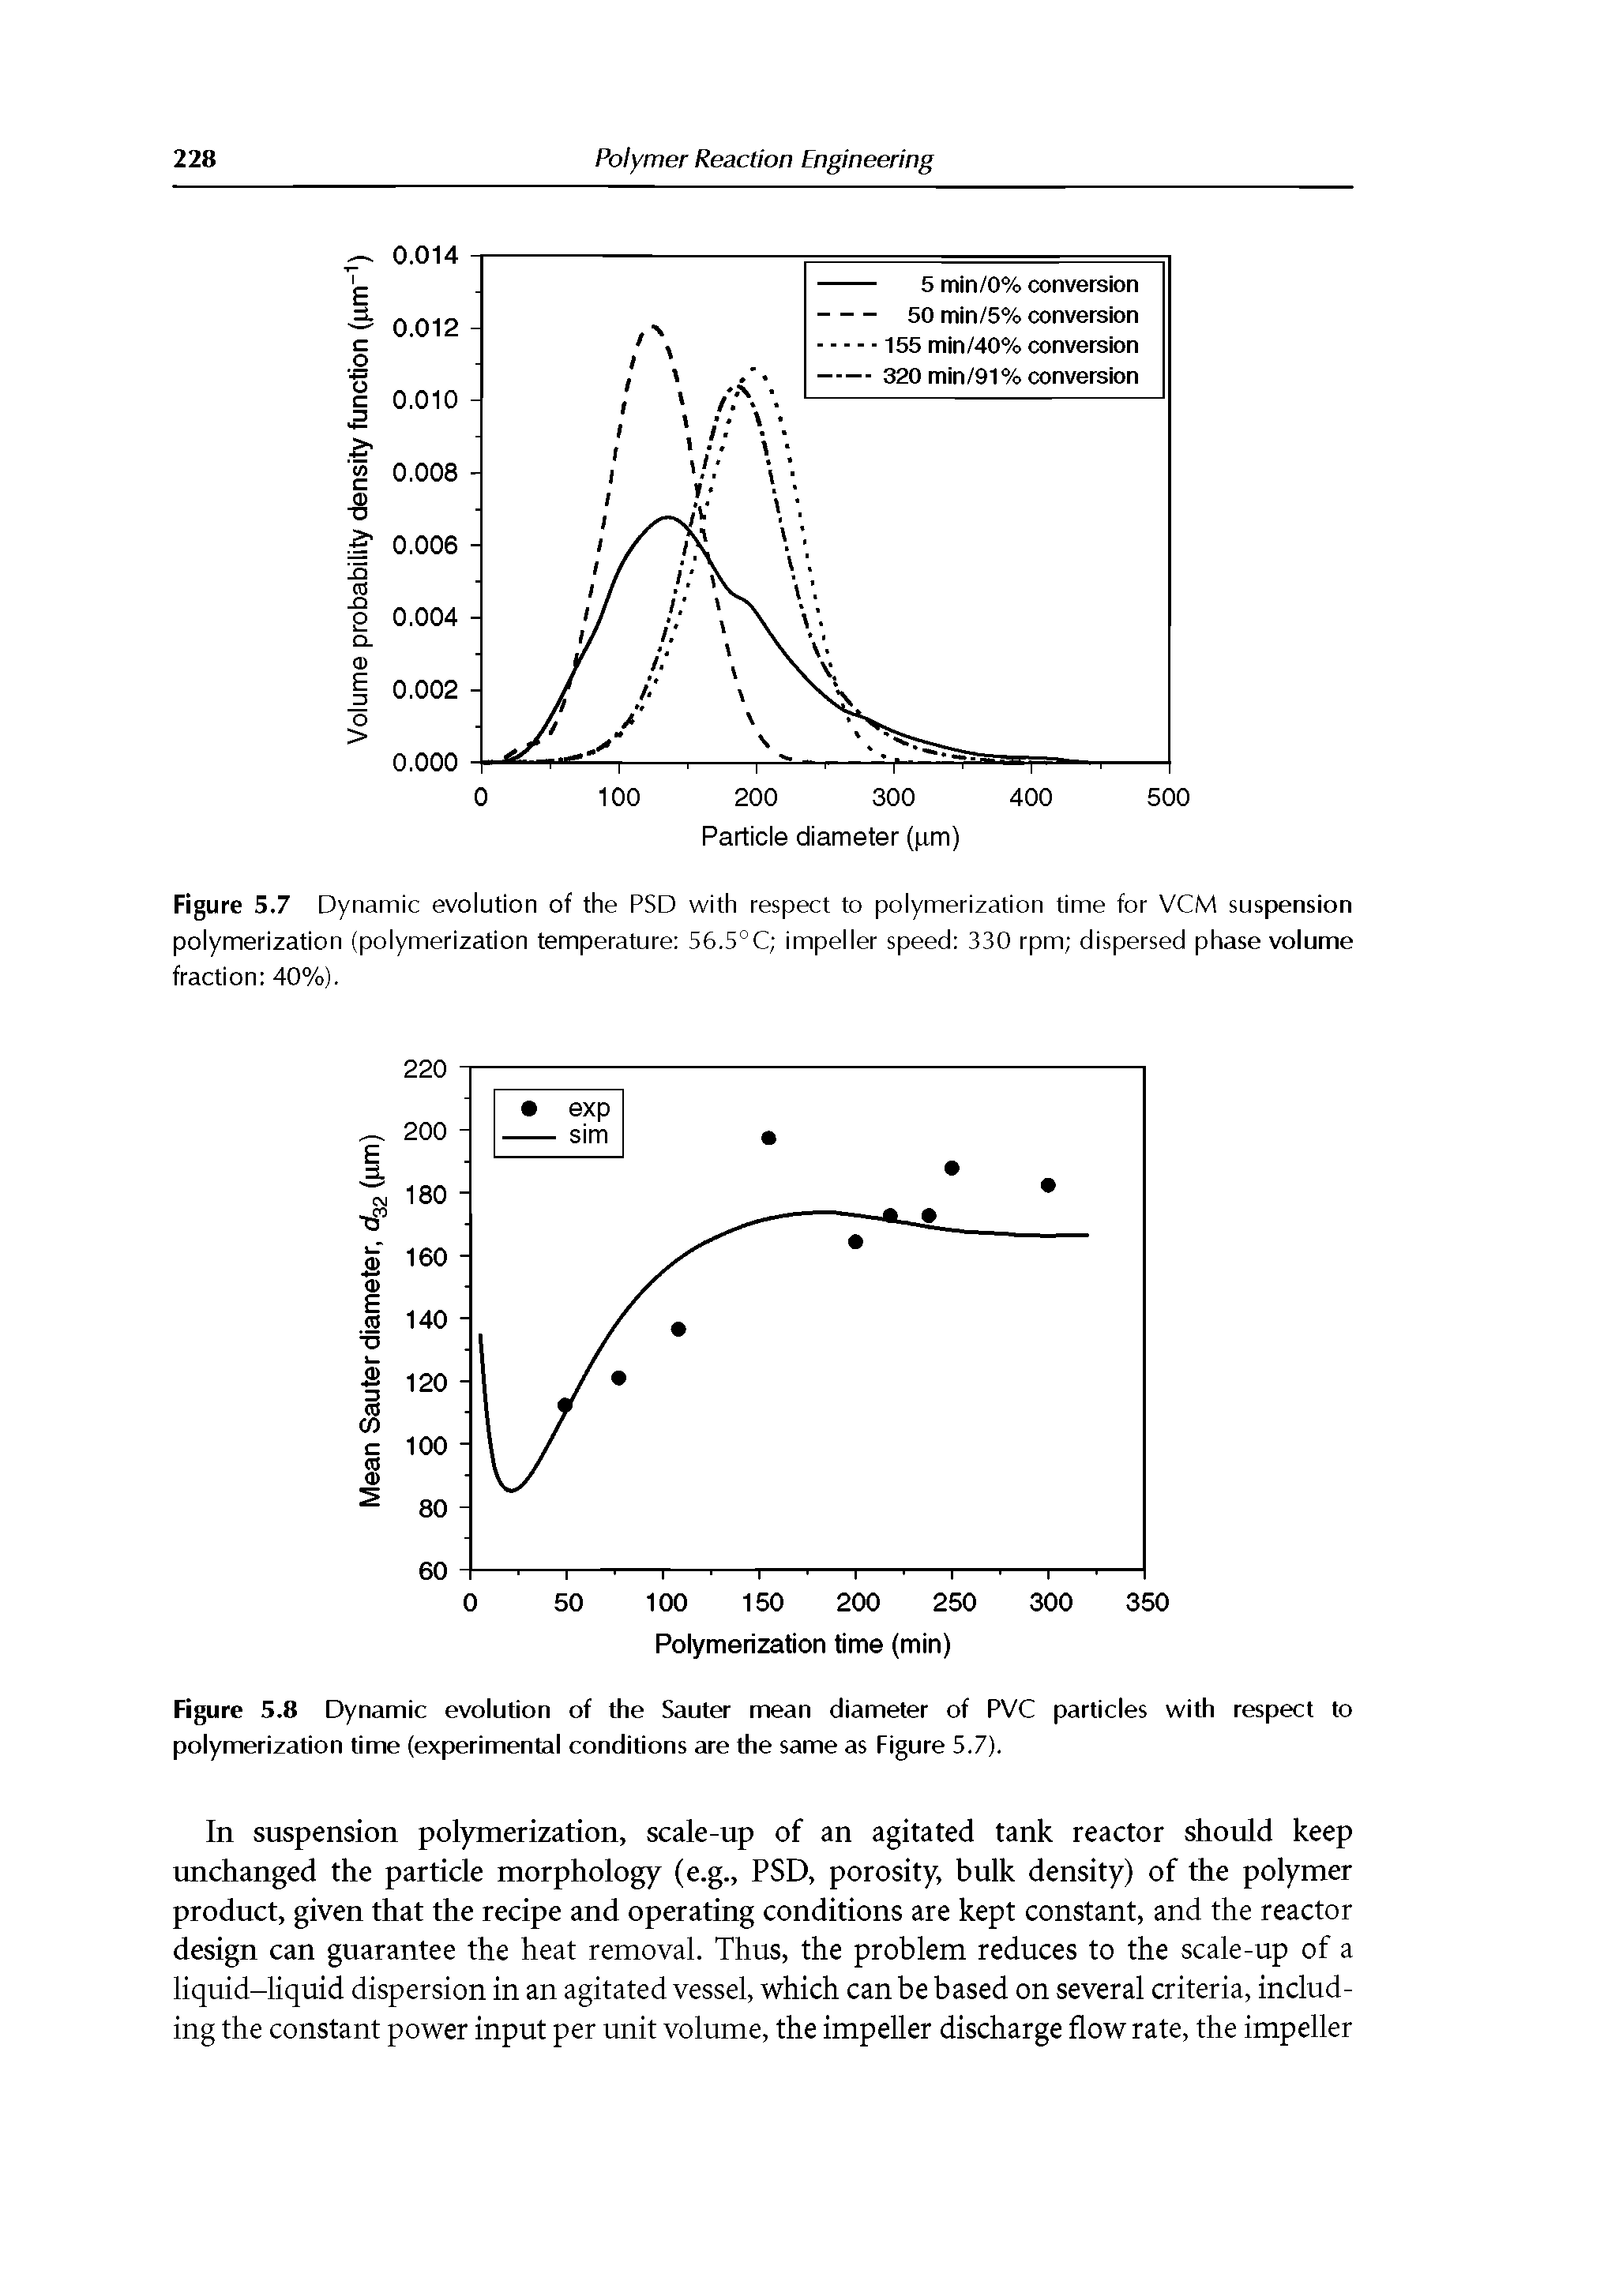 Figure 5.7 Dynamic evolution of the PSD with respect to polymerization time for VCM suspension polymerization (polymerization temperature 56.5°C impeller speed 330 rpm dispersed phase volume fraction 40%).